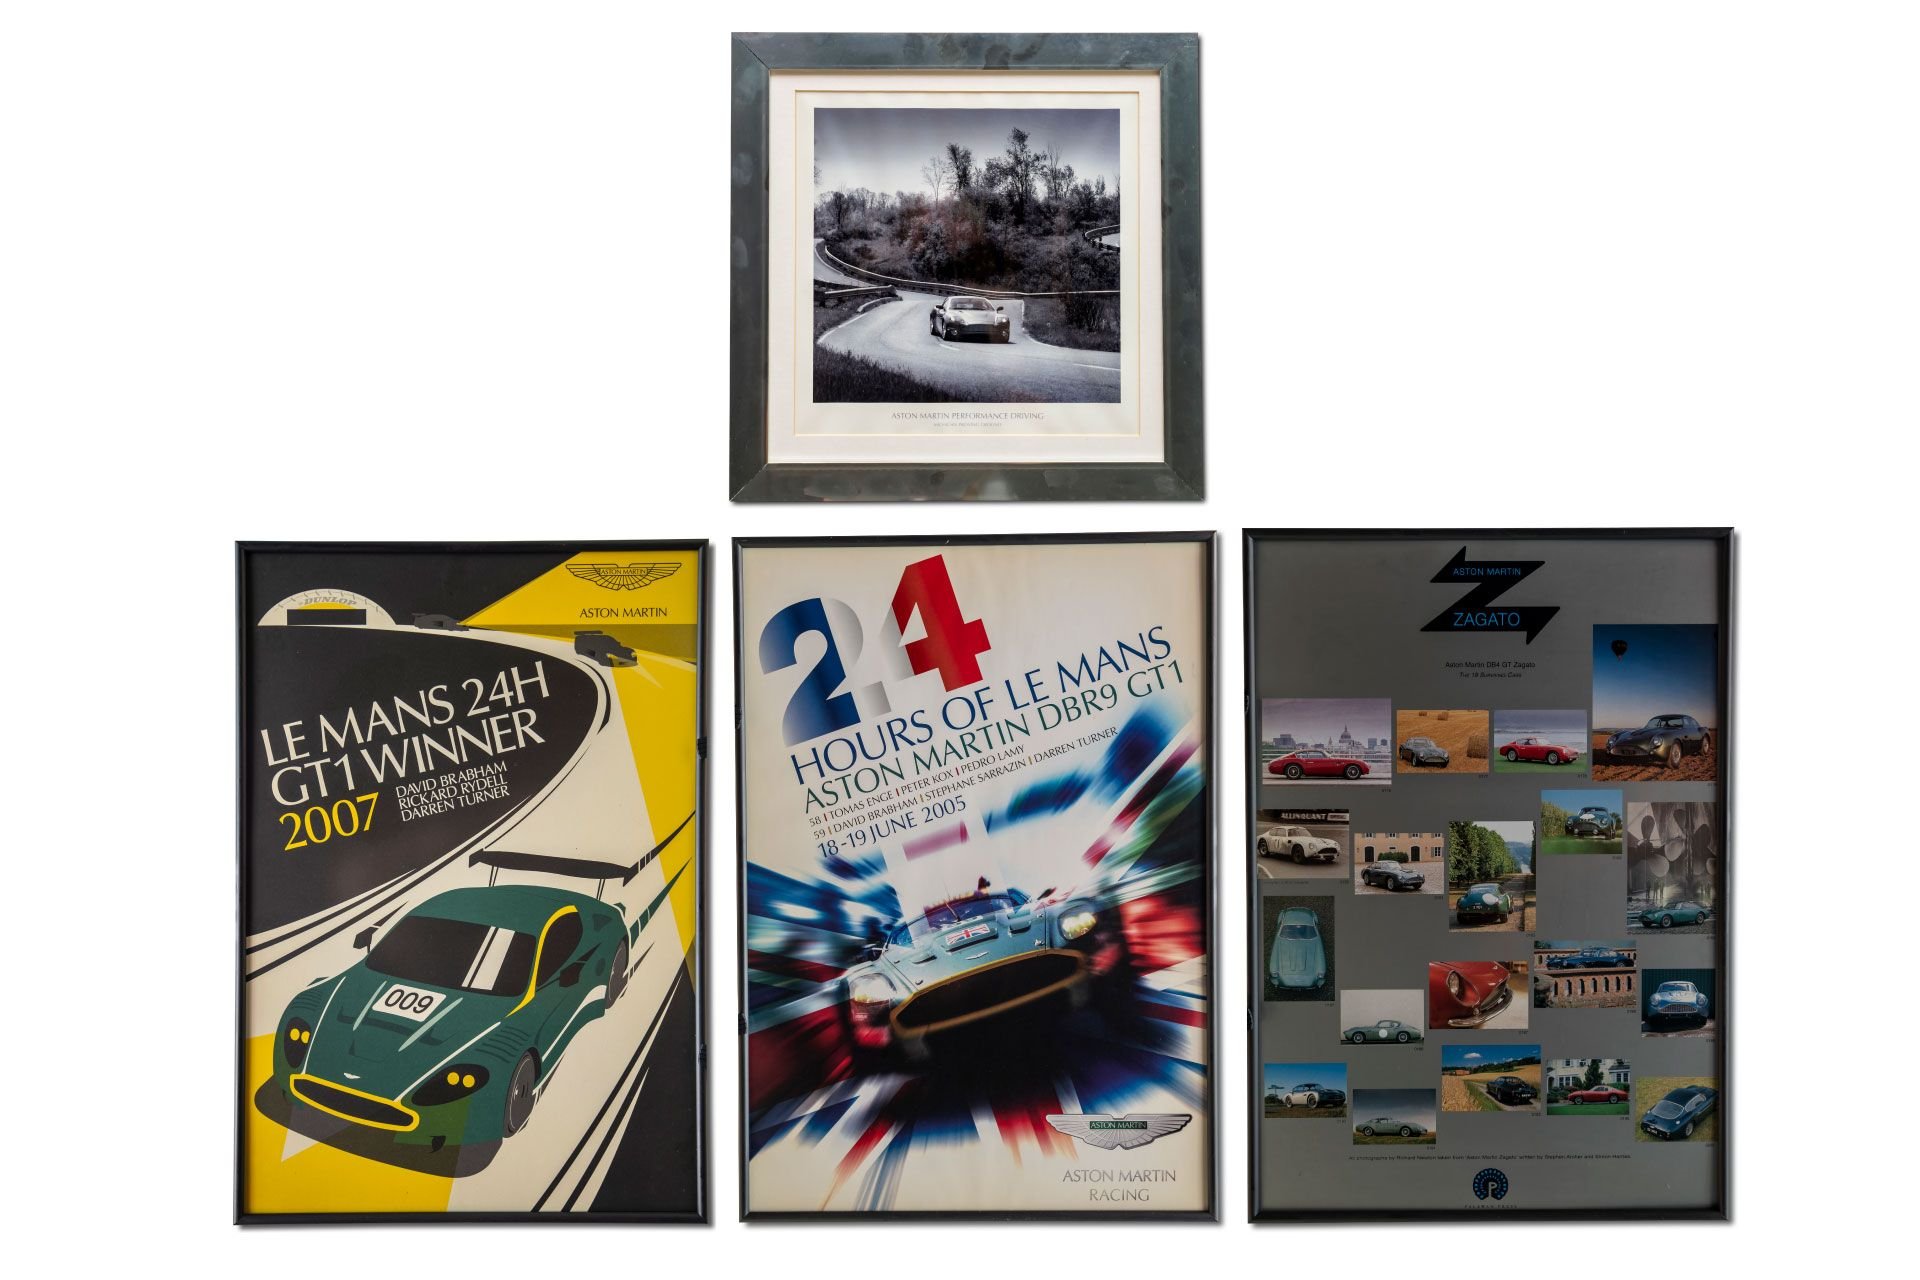 For Sale Group of Assorted 'Aston Martin' Memorabilia including Posters and Photographs